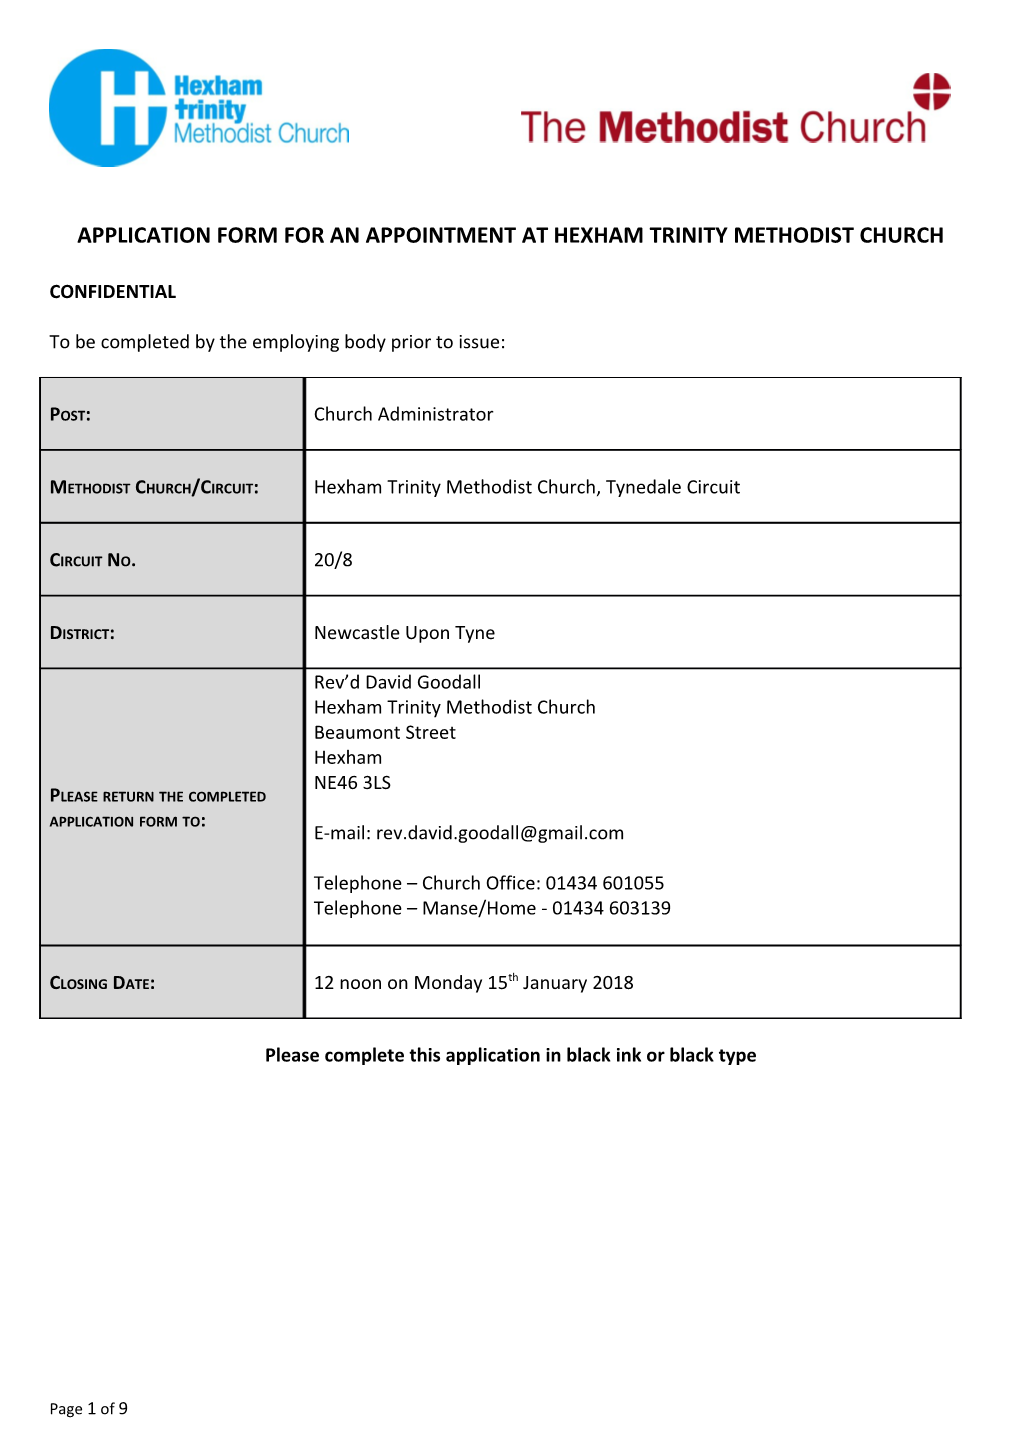 Application Form for an Appointment at Hexham Trinity Methodist Church